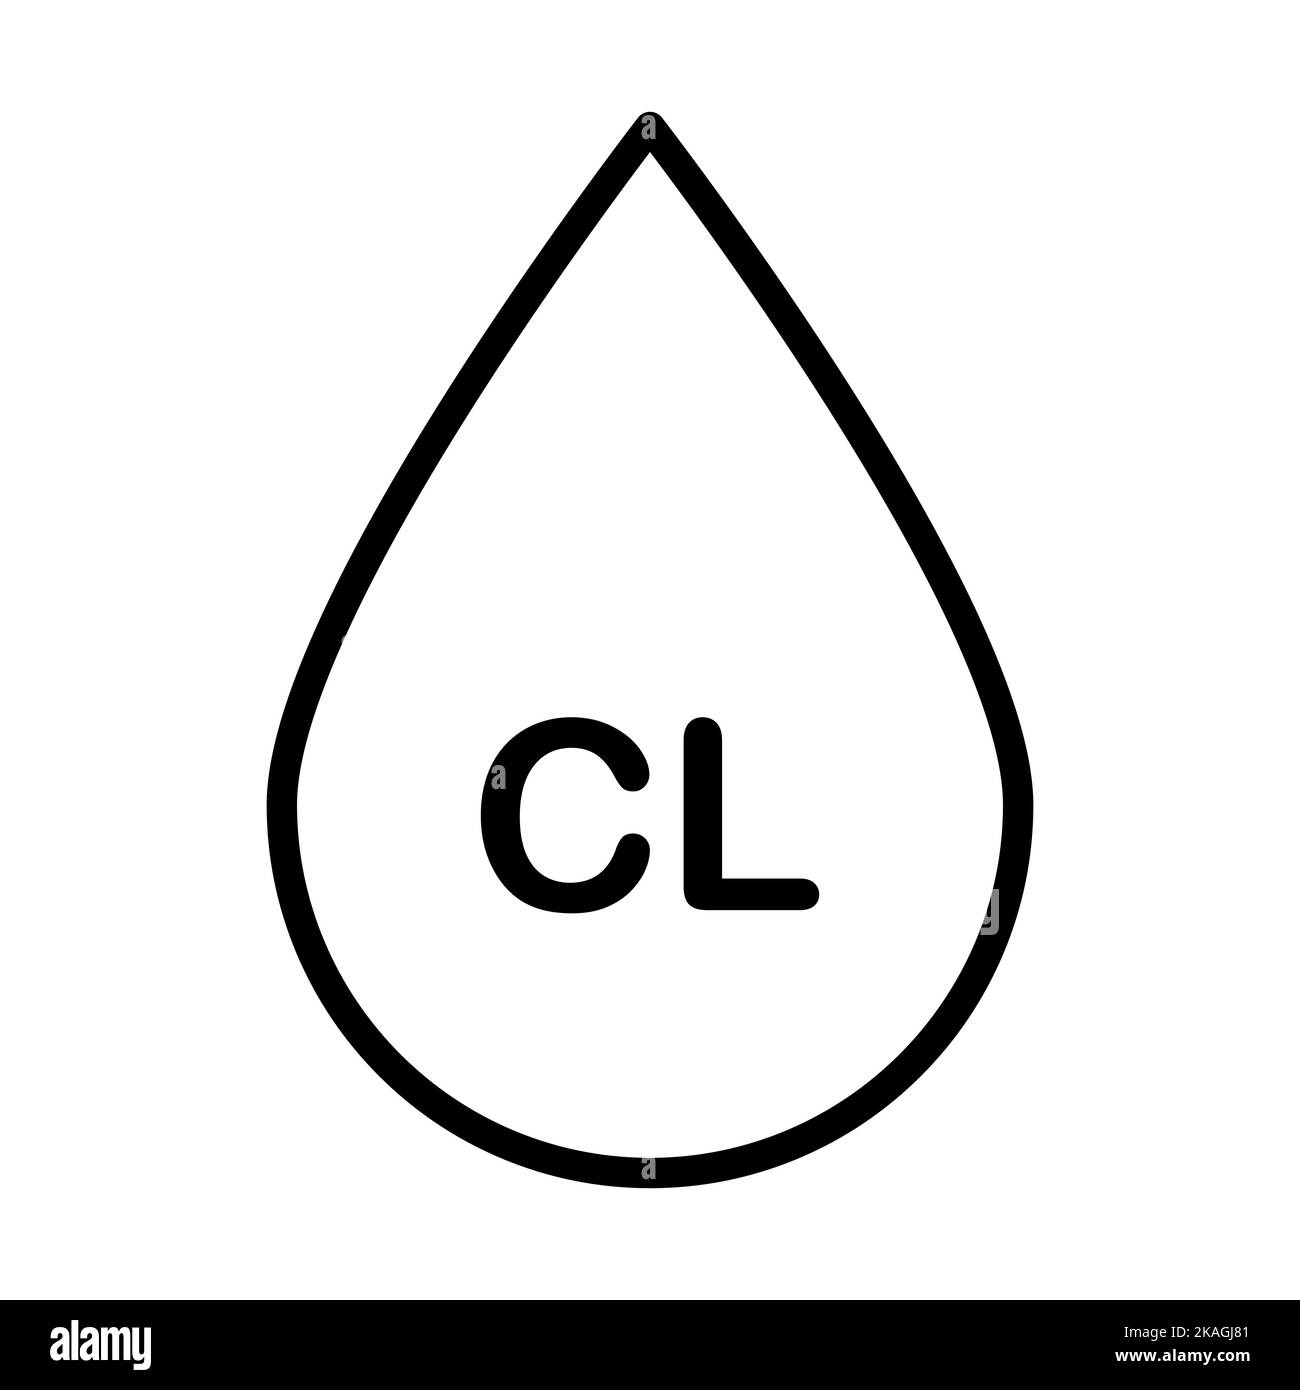 Drop with chlorine. Water containing chlorine linear icon vector for graphic design, logo, web site, social media, mobile app, ui Stock Vector